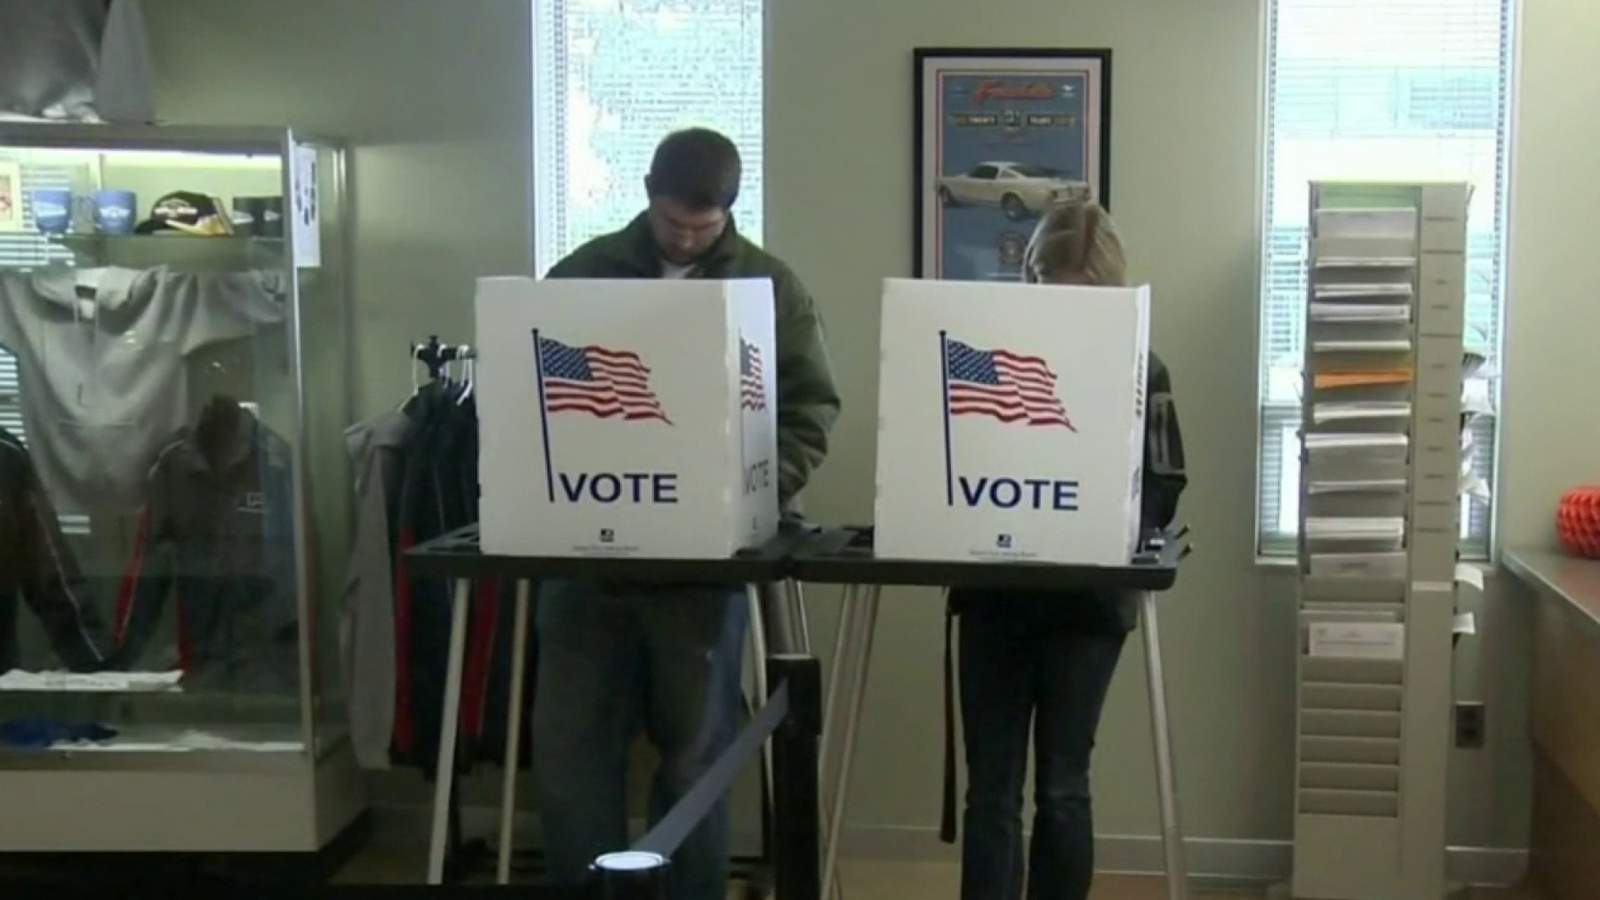 Michigan Secretary of State explains absentee ballot voting, what it means for citizens